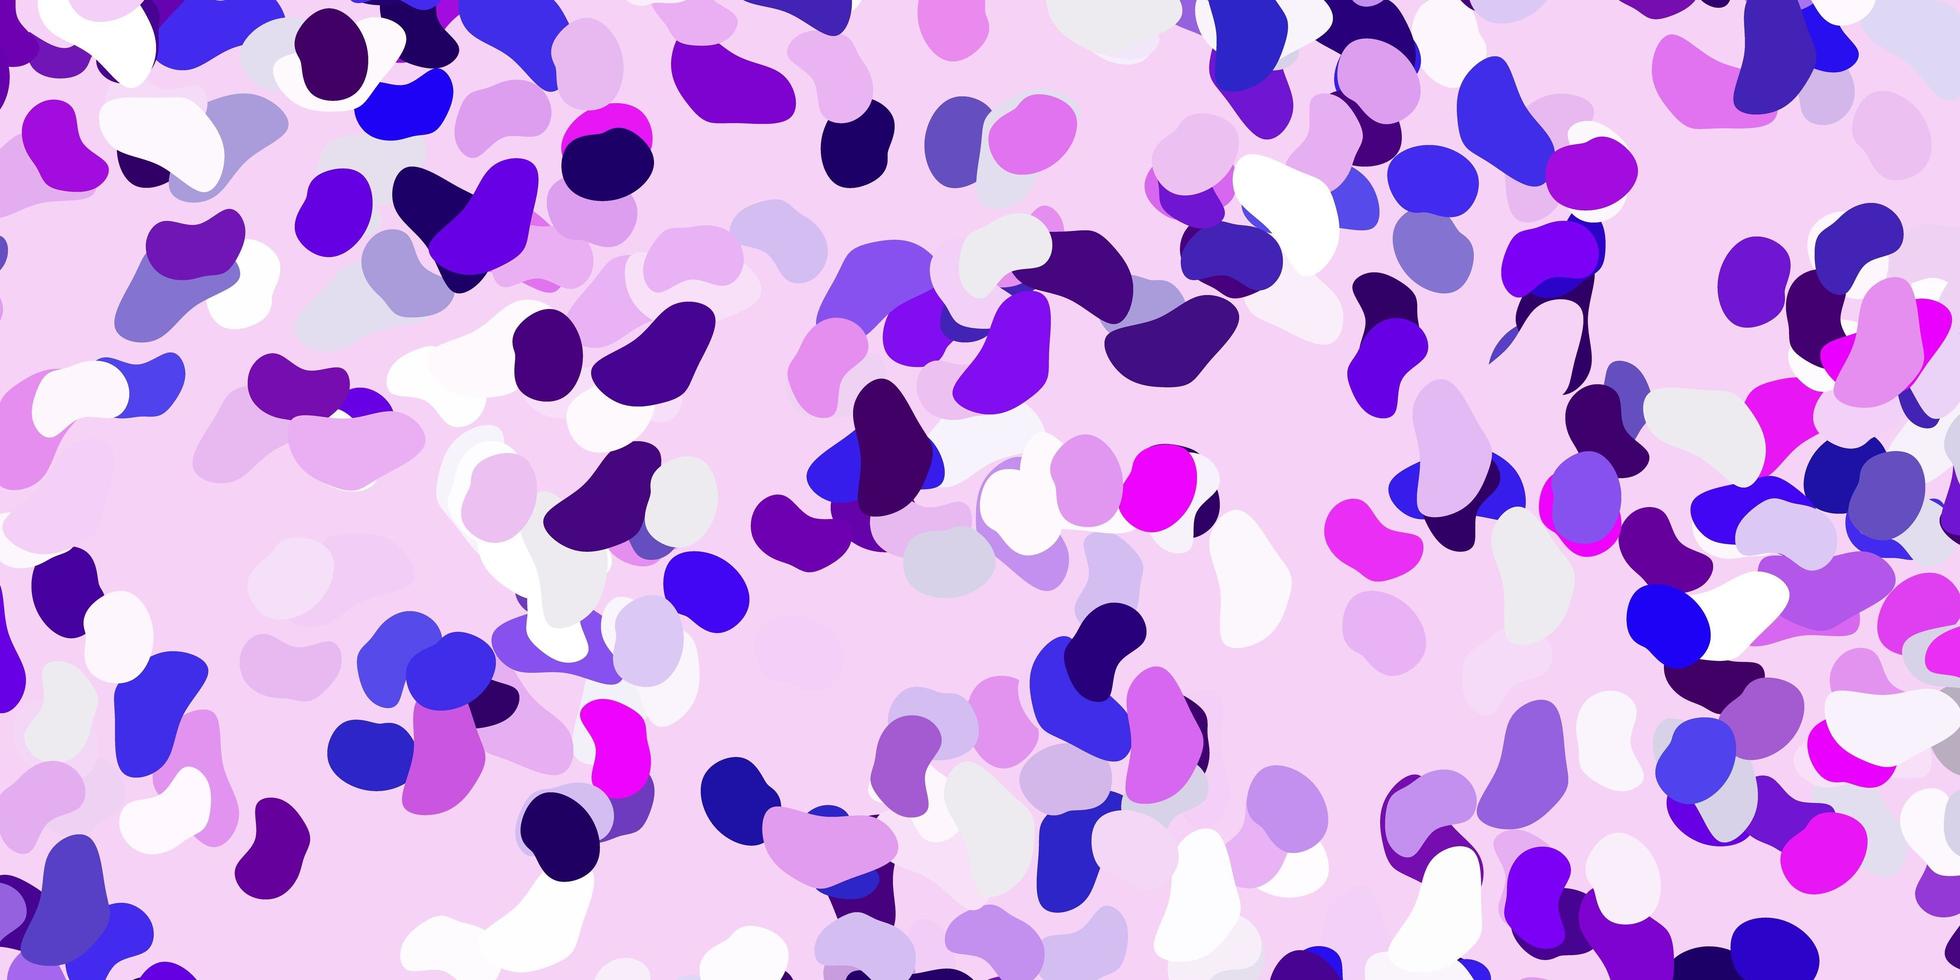 Light purple vector template with abstract forms